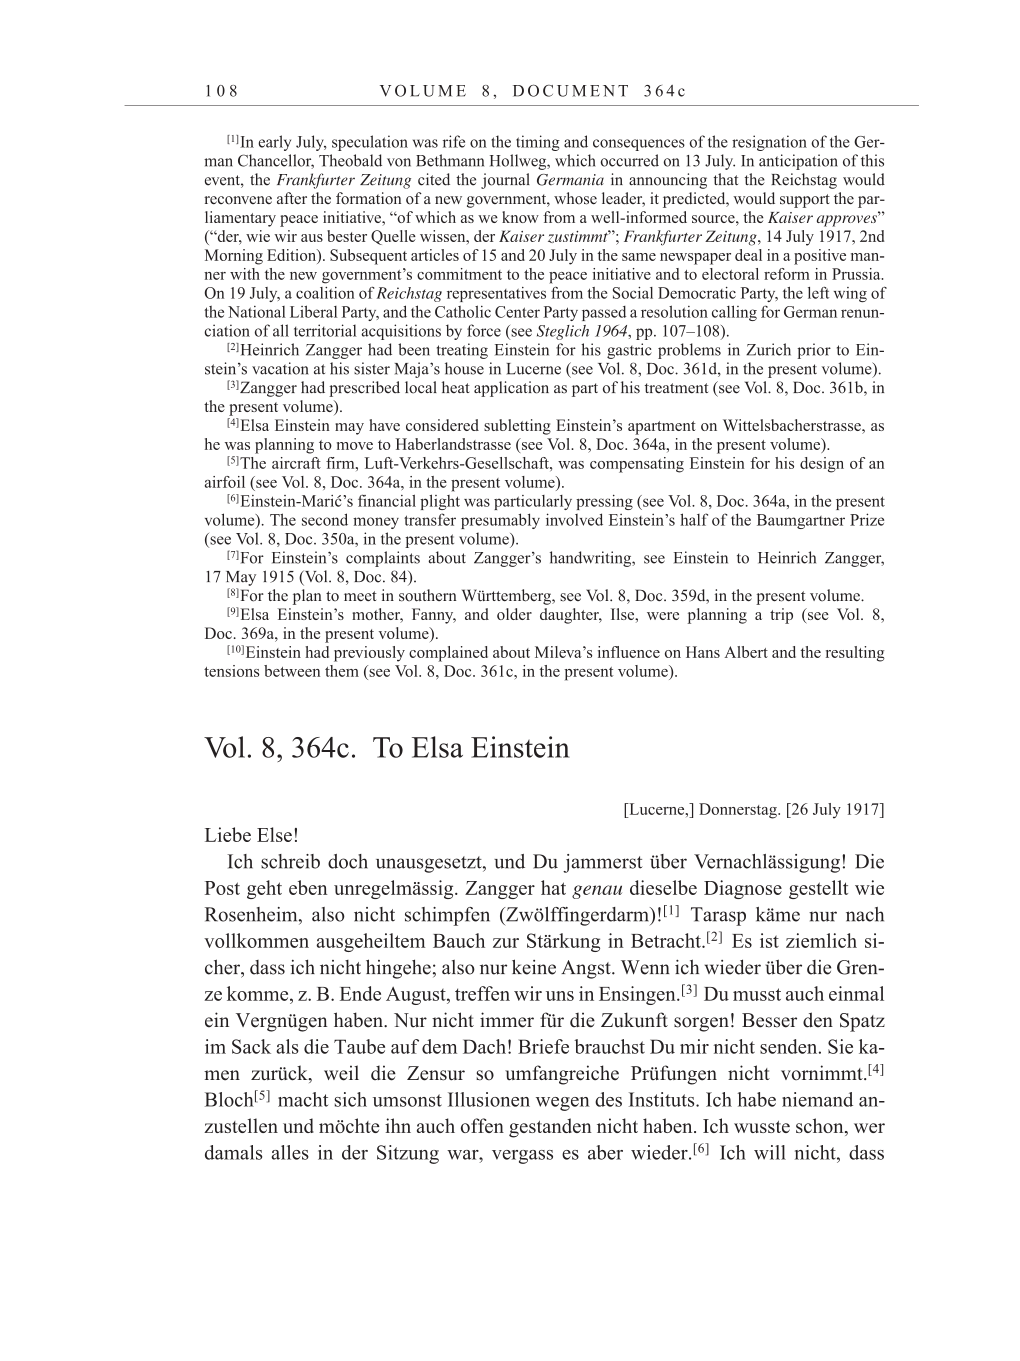 Volume 10: The Berlin Years: Correspondence May-December 1920 / Supplementary Correspondence 1909-1920 page 108